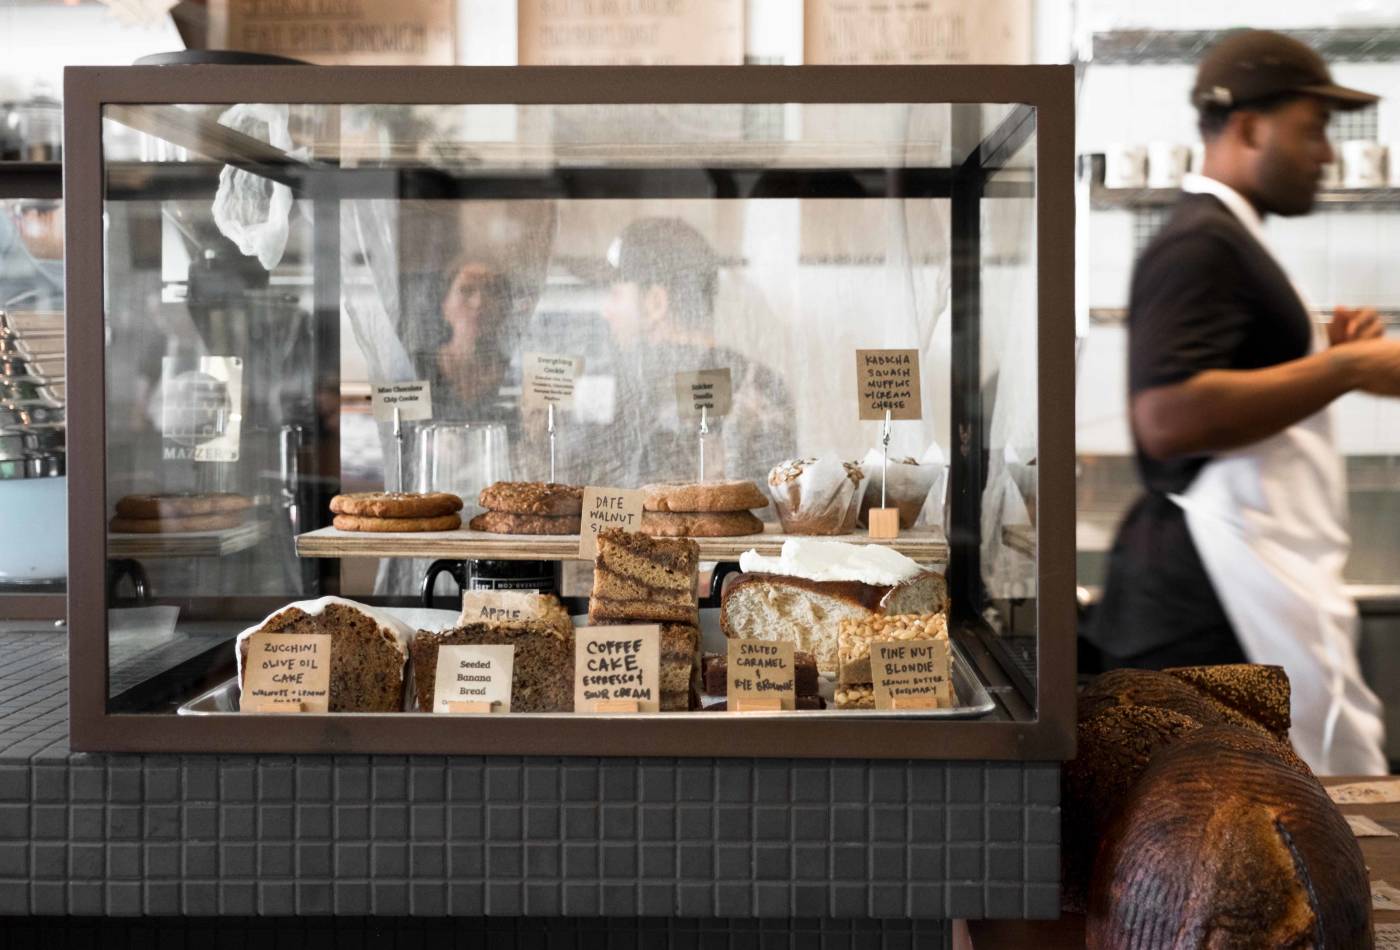 This neighborhood bakery and café, renowned for its naturally fermented sourdough bread, was immediately popular when it first opened in a space of our design. So popular that the owners asked us a year later to come back and work on an expansion into the adjacent space.